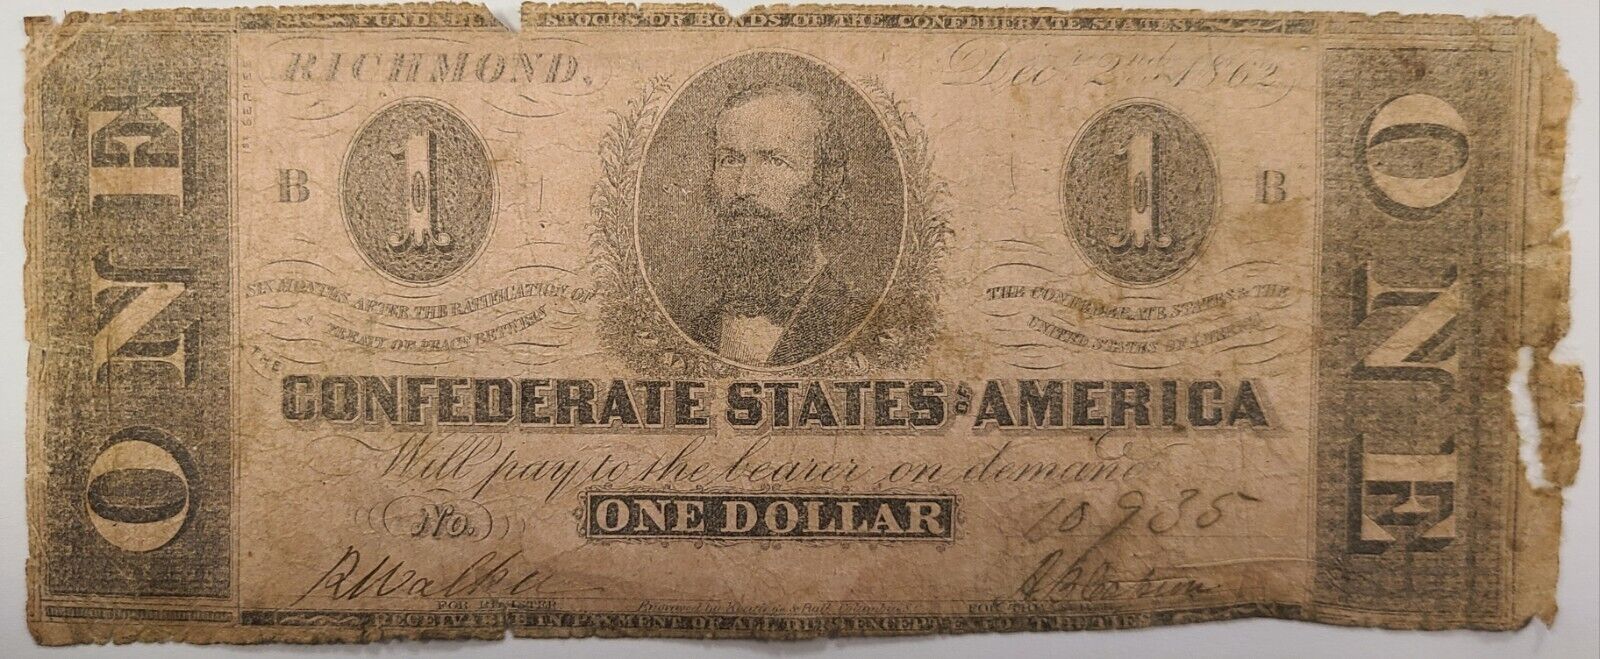 T-55 1862 $1 Confederate States Note S/N 10935 G Good